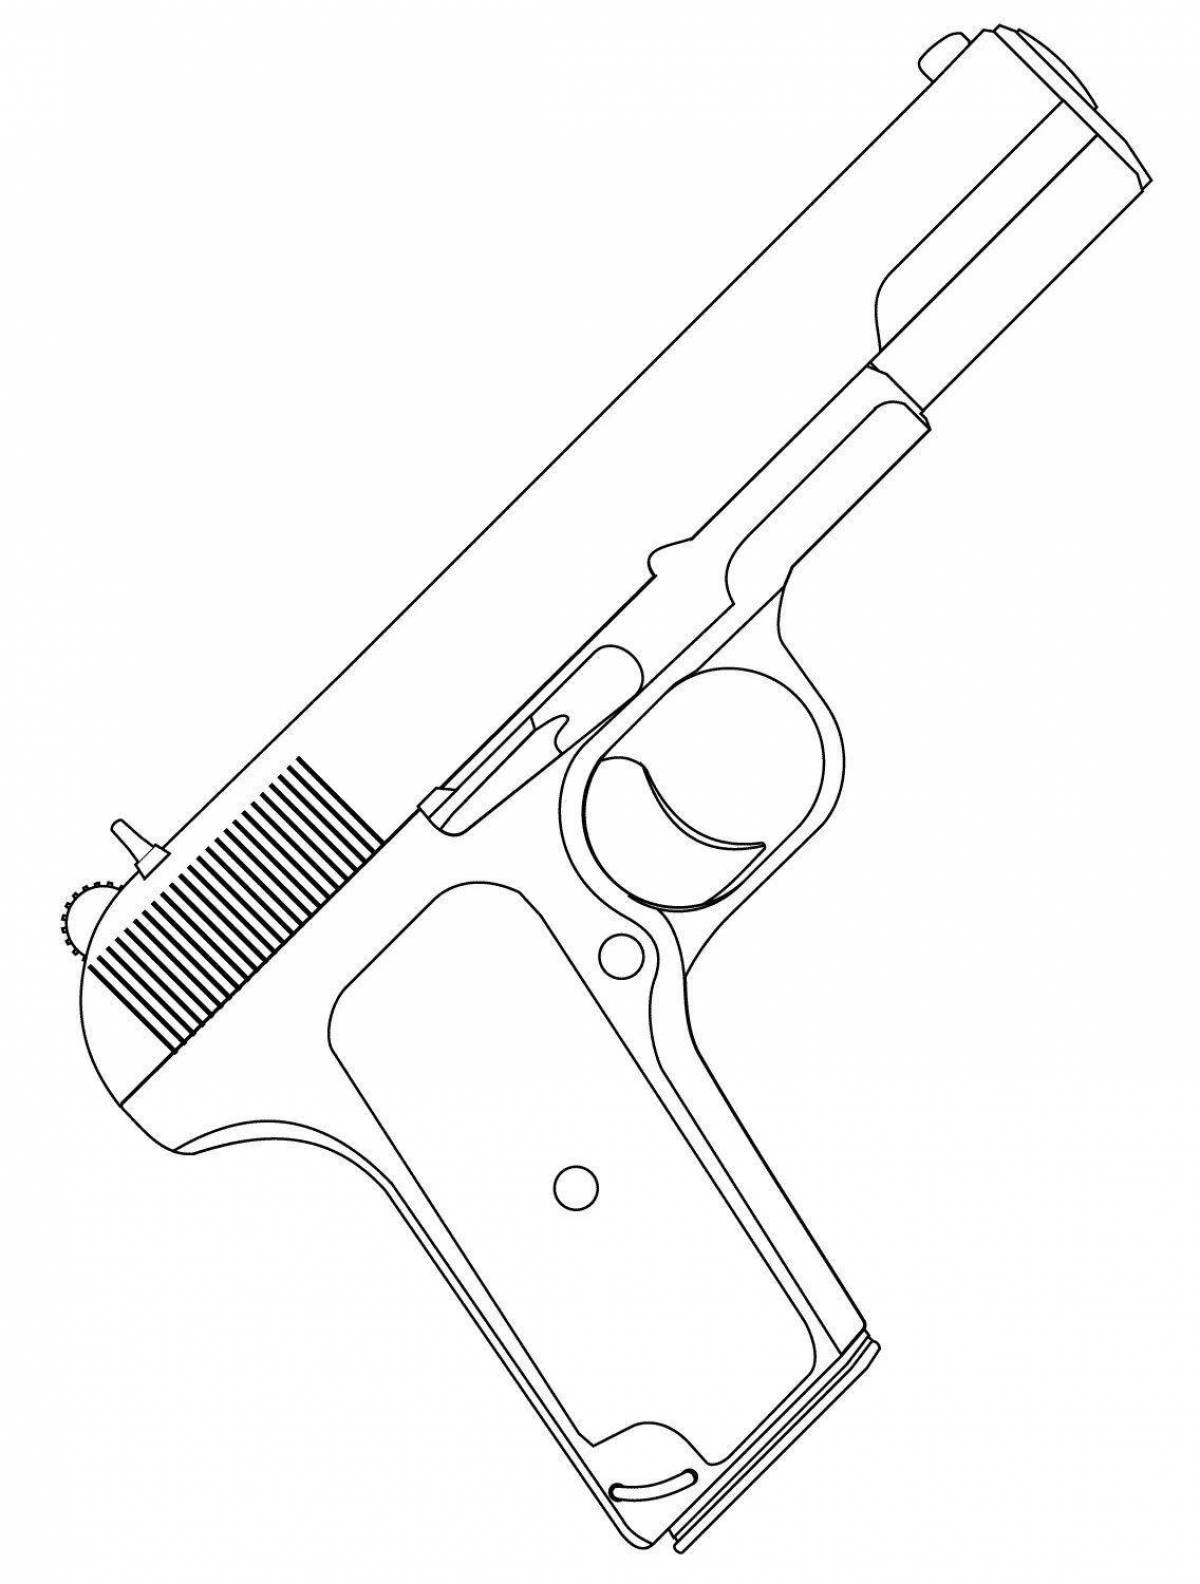 Glorious gun coloring pages for boys